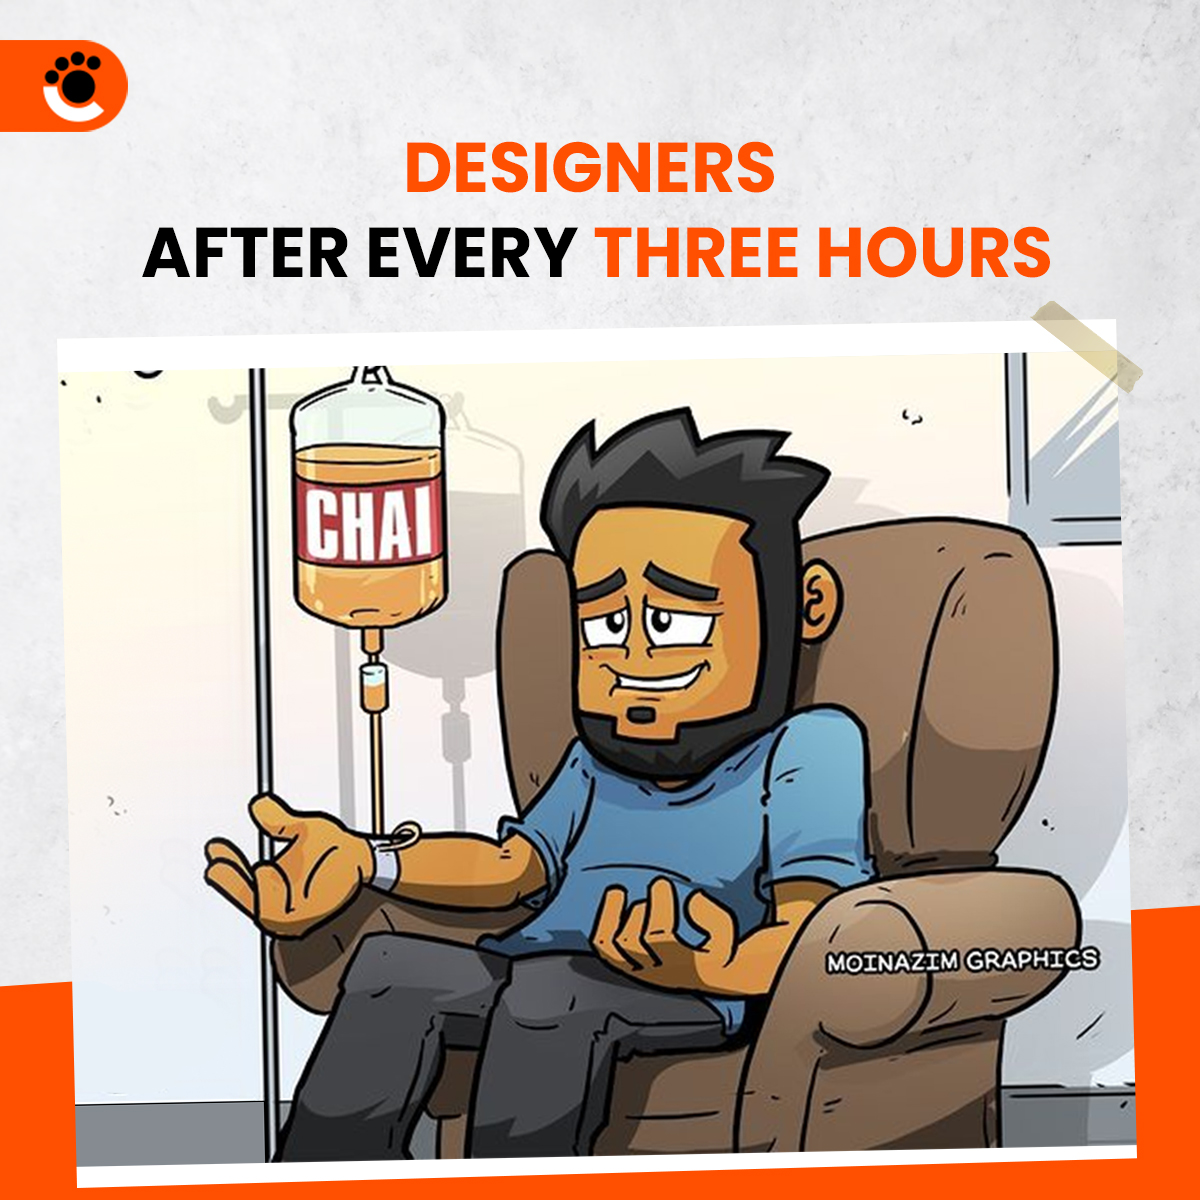 After every three hours ☕ 😂 🤣

#designer #design #designersituations #tea #teatime #chai #chailover #drip #teadrips #memes #memesfunny #memesdaily #funny #funtimes #funfacts #funnymemes #onlinedelivery #grocery #food #pharma #lahore #islamabad #rawalpindi #cmore #cheetay